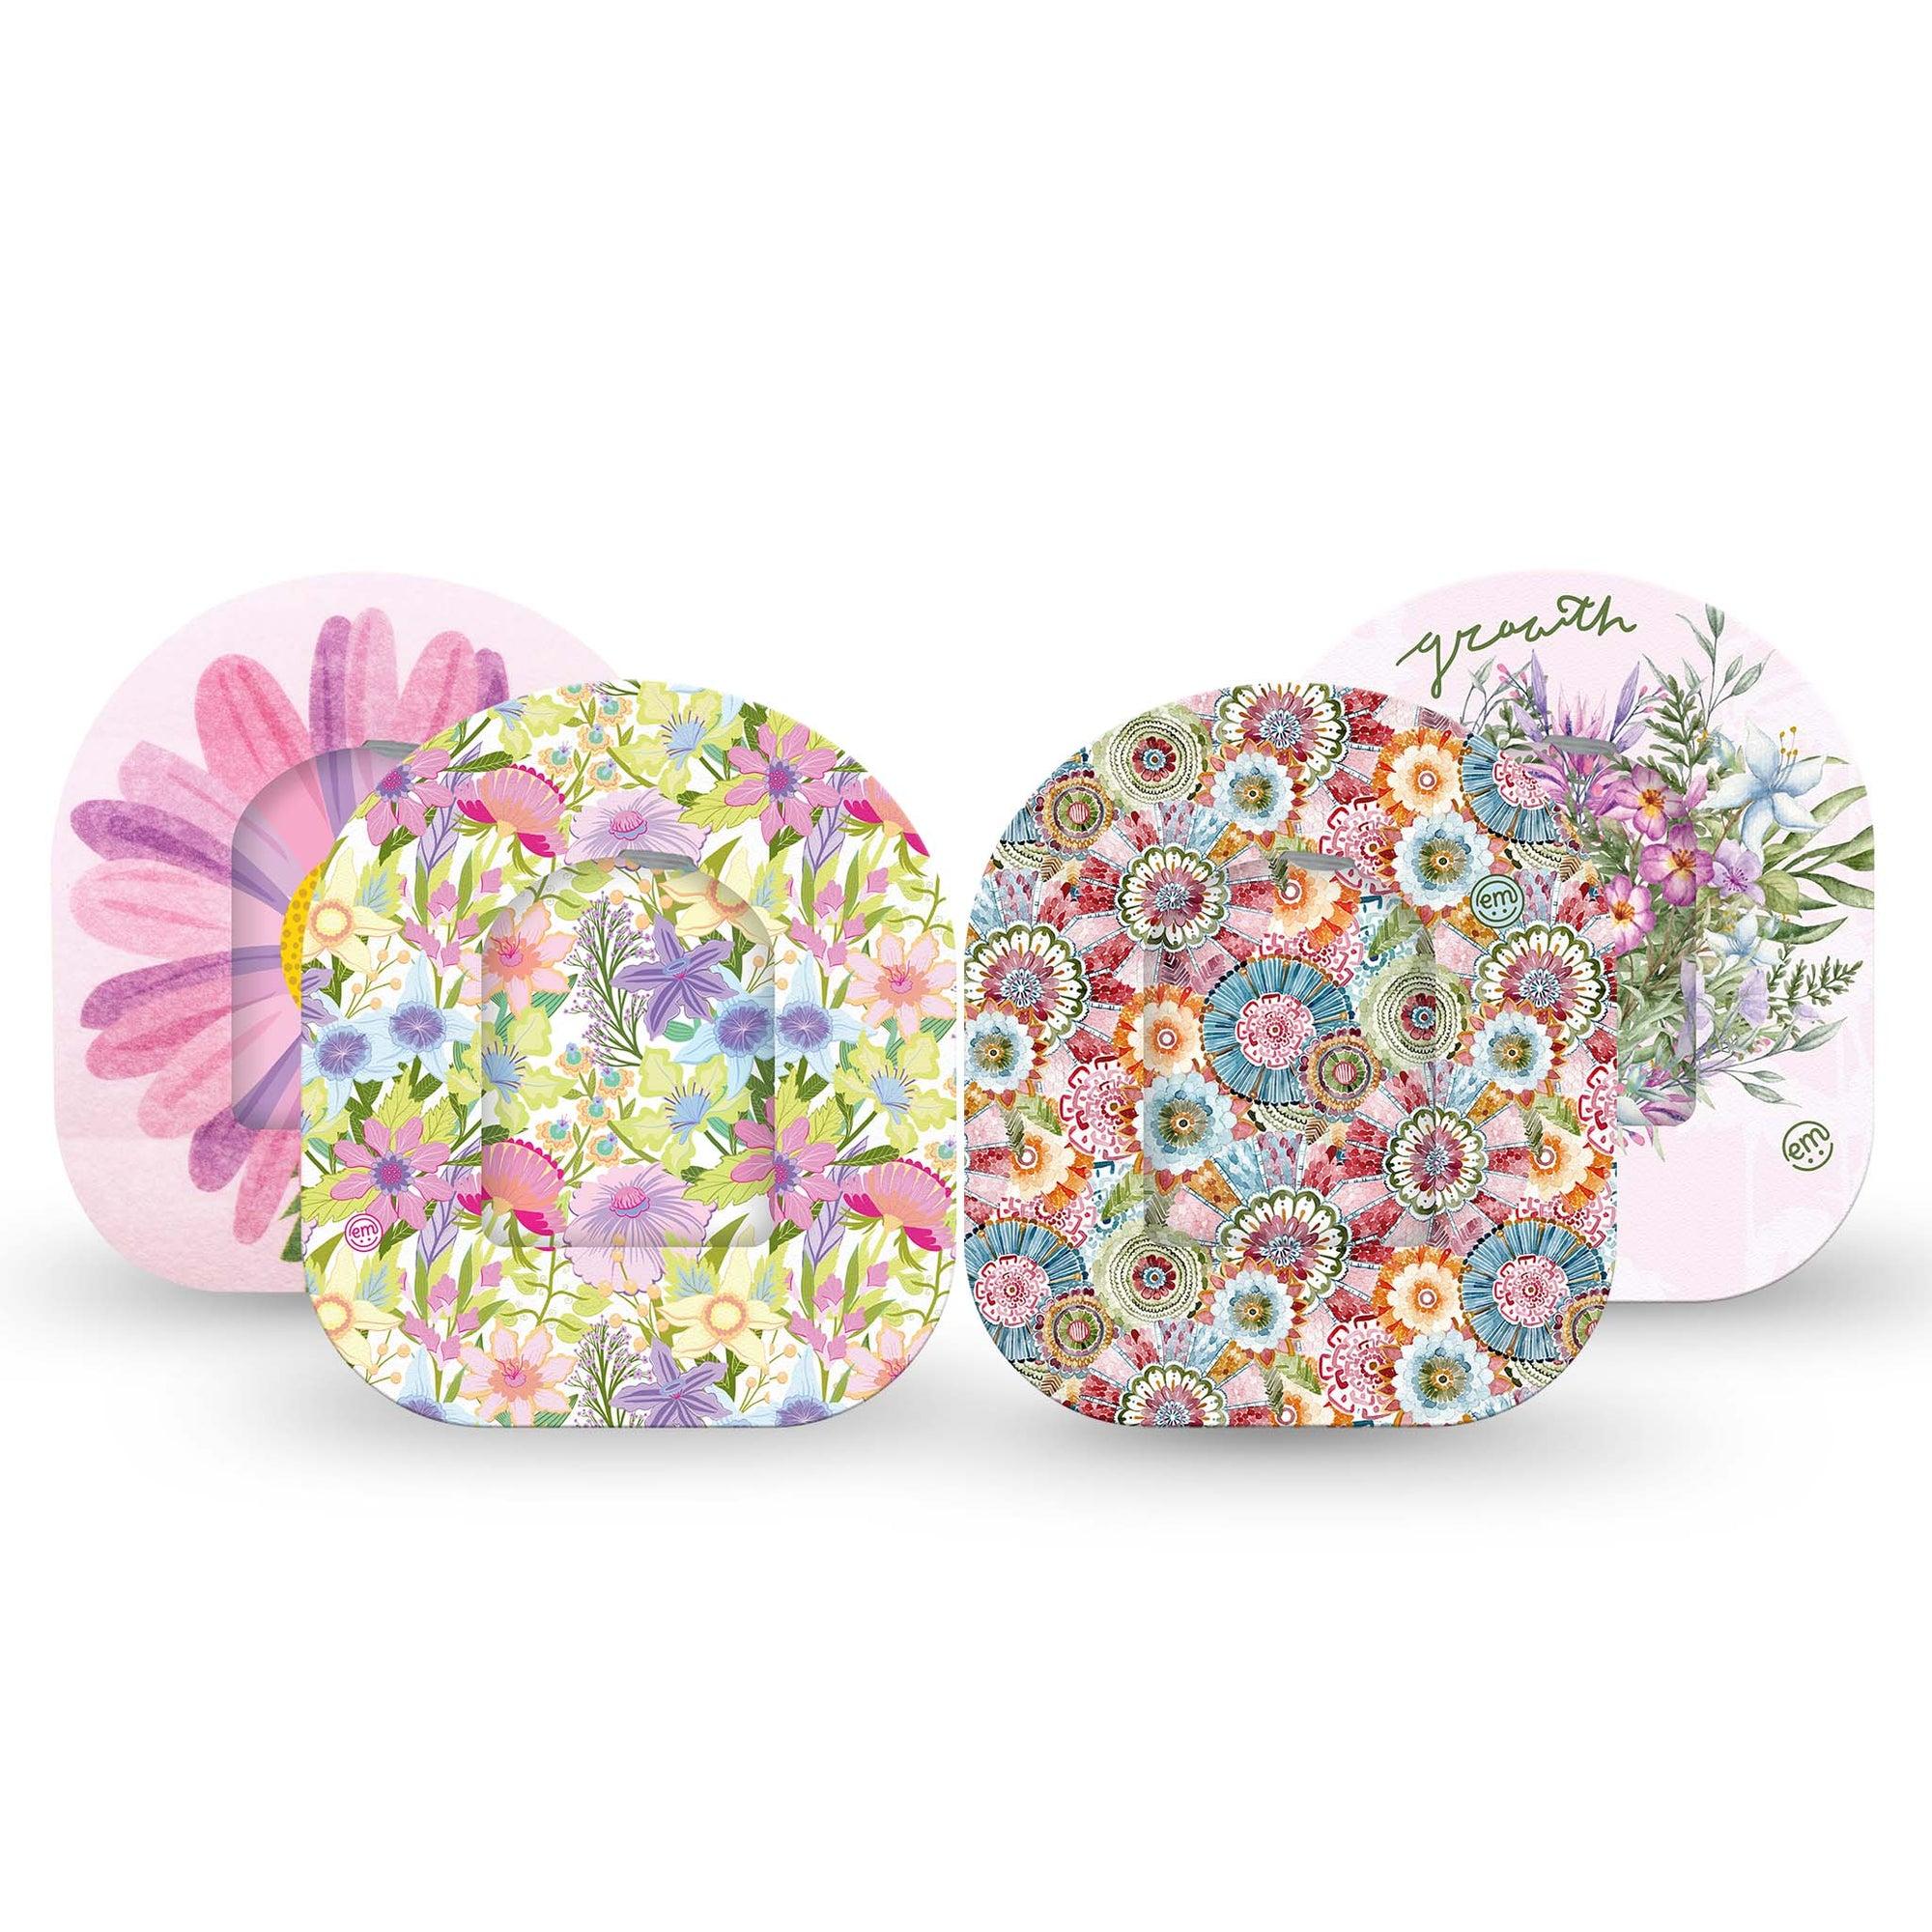 ExpressionMed Floaty Floral Variety Pack OmniPod Tape and Sticker, 8-Pack Variety, Petal Dreamer, CGM Fixing Ring Patch Design